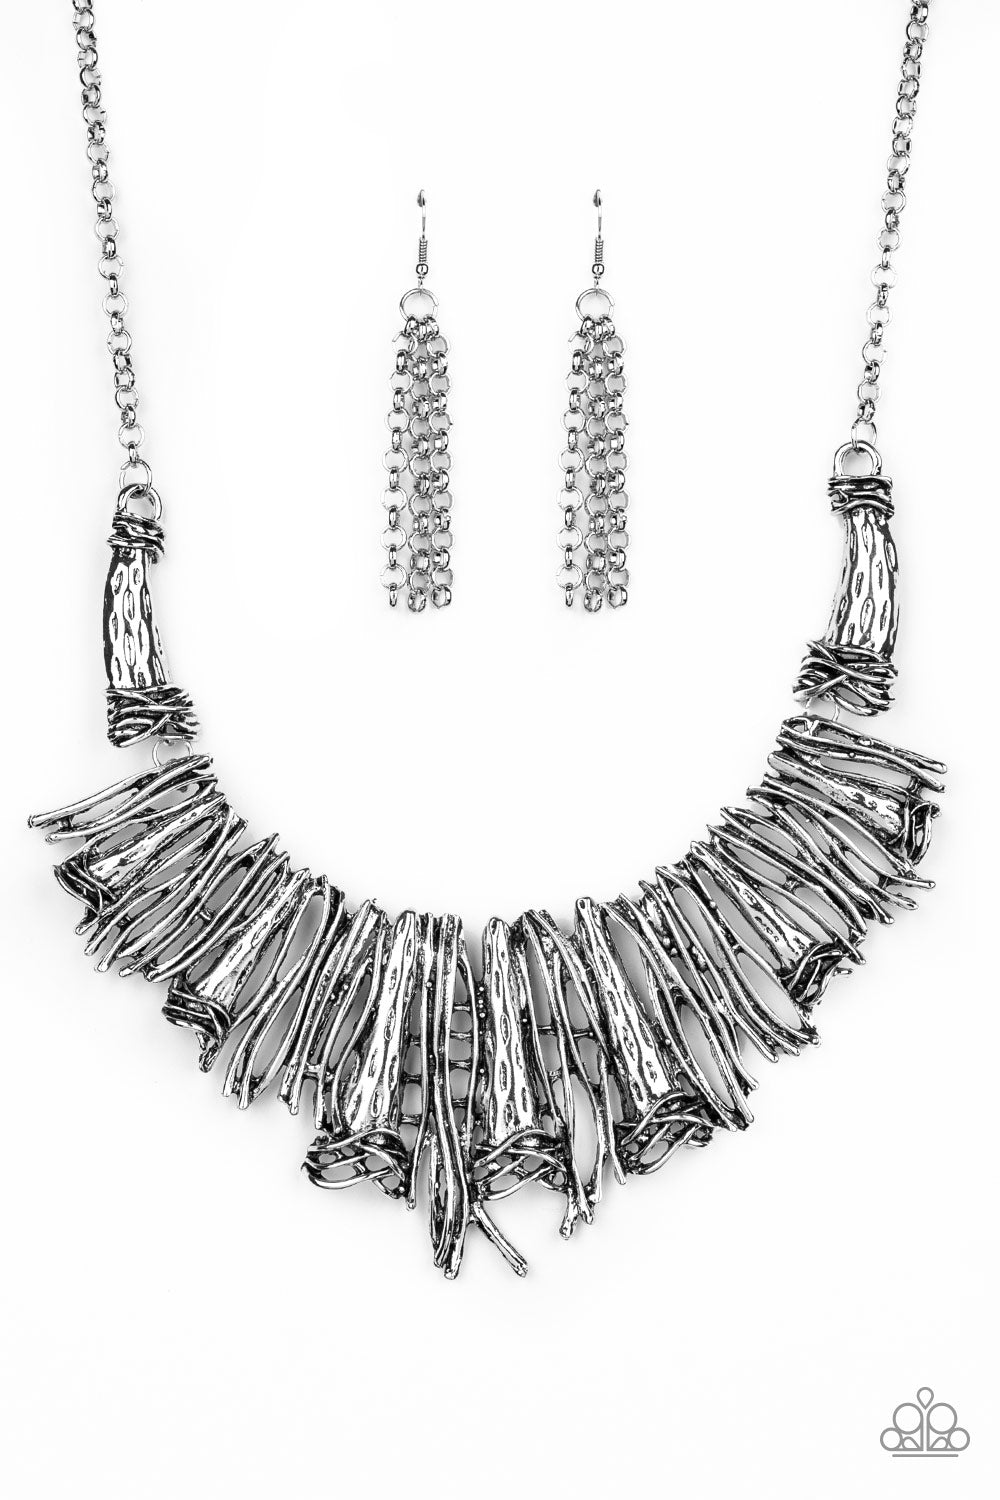 Paparazzi In The MANE-stream - Silver Antiqued Necklace - A Finishing Touch 